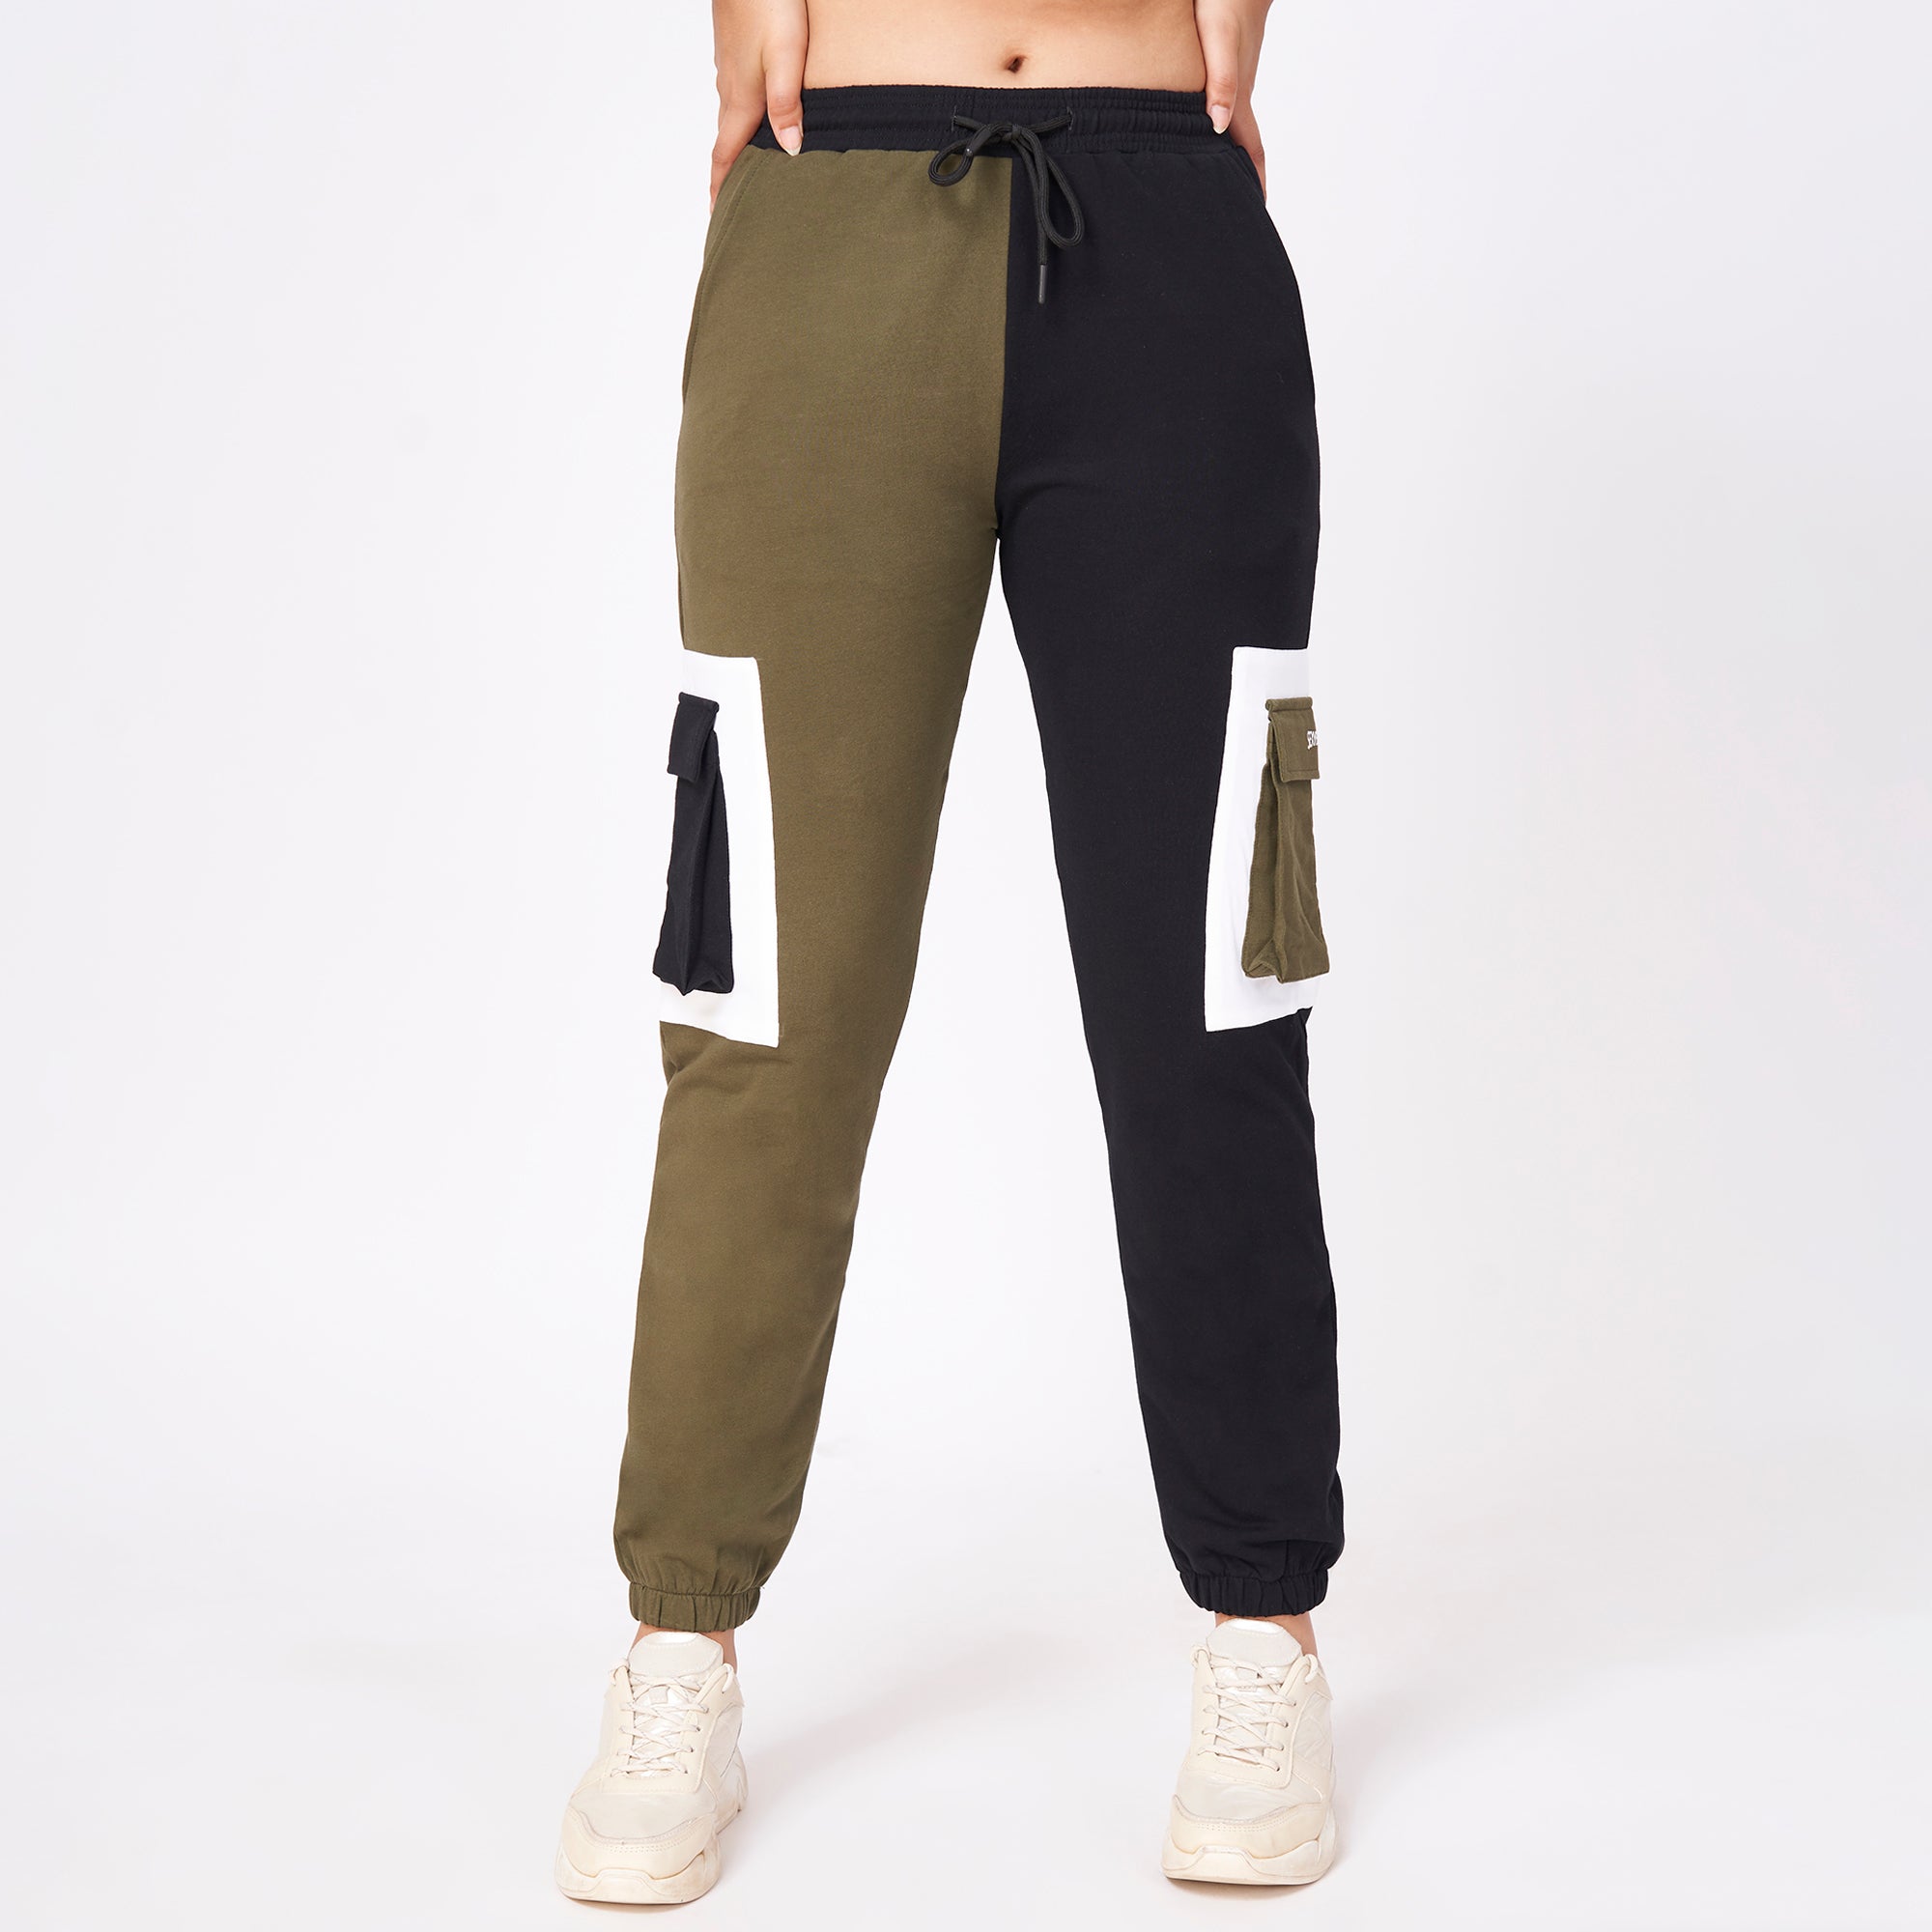 Discovery Joggers